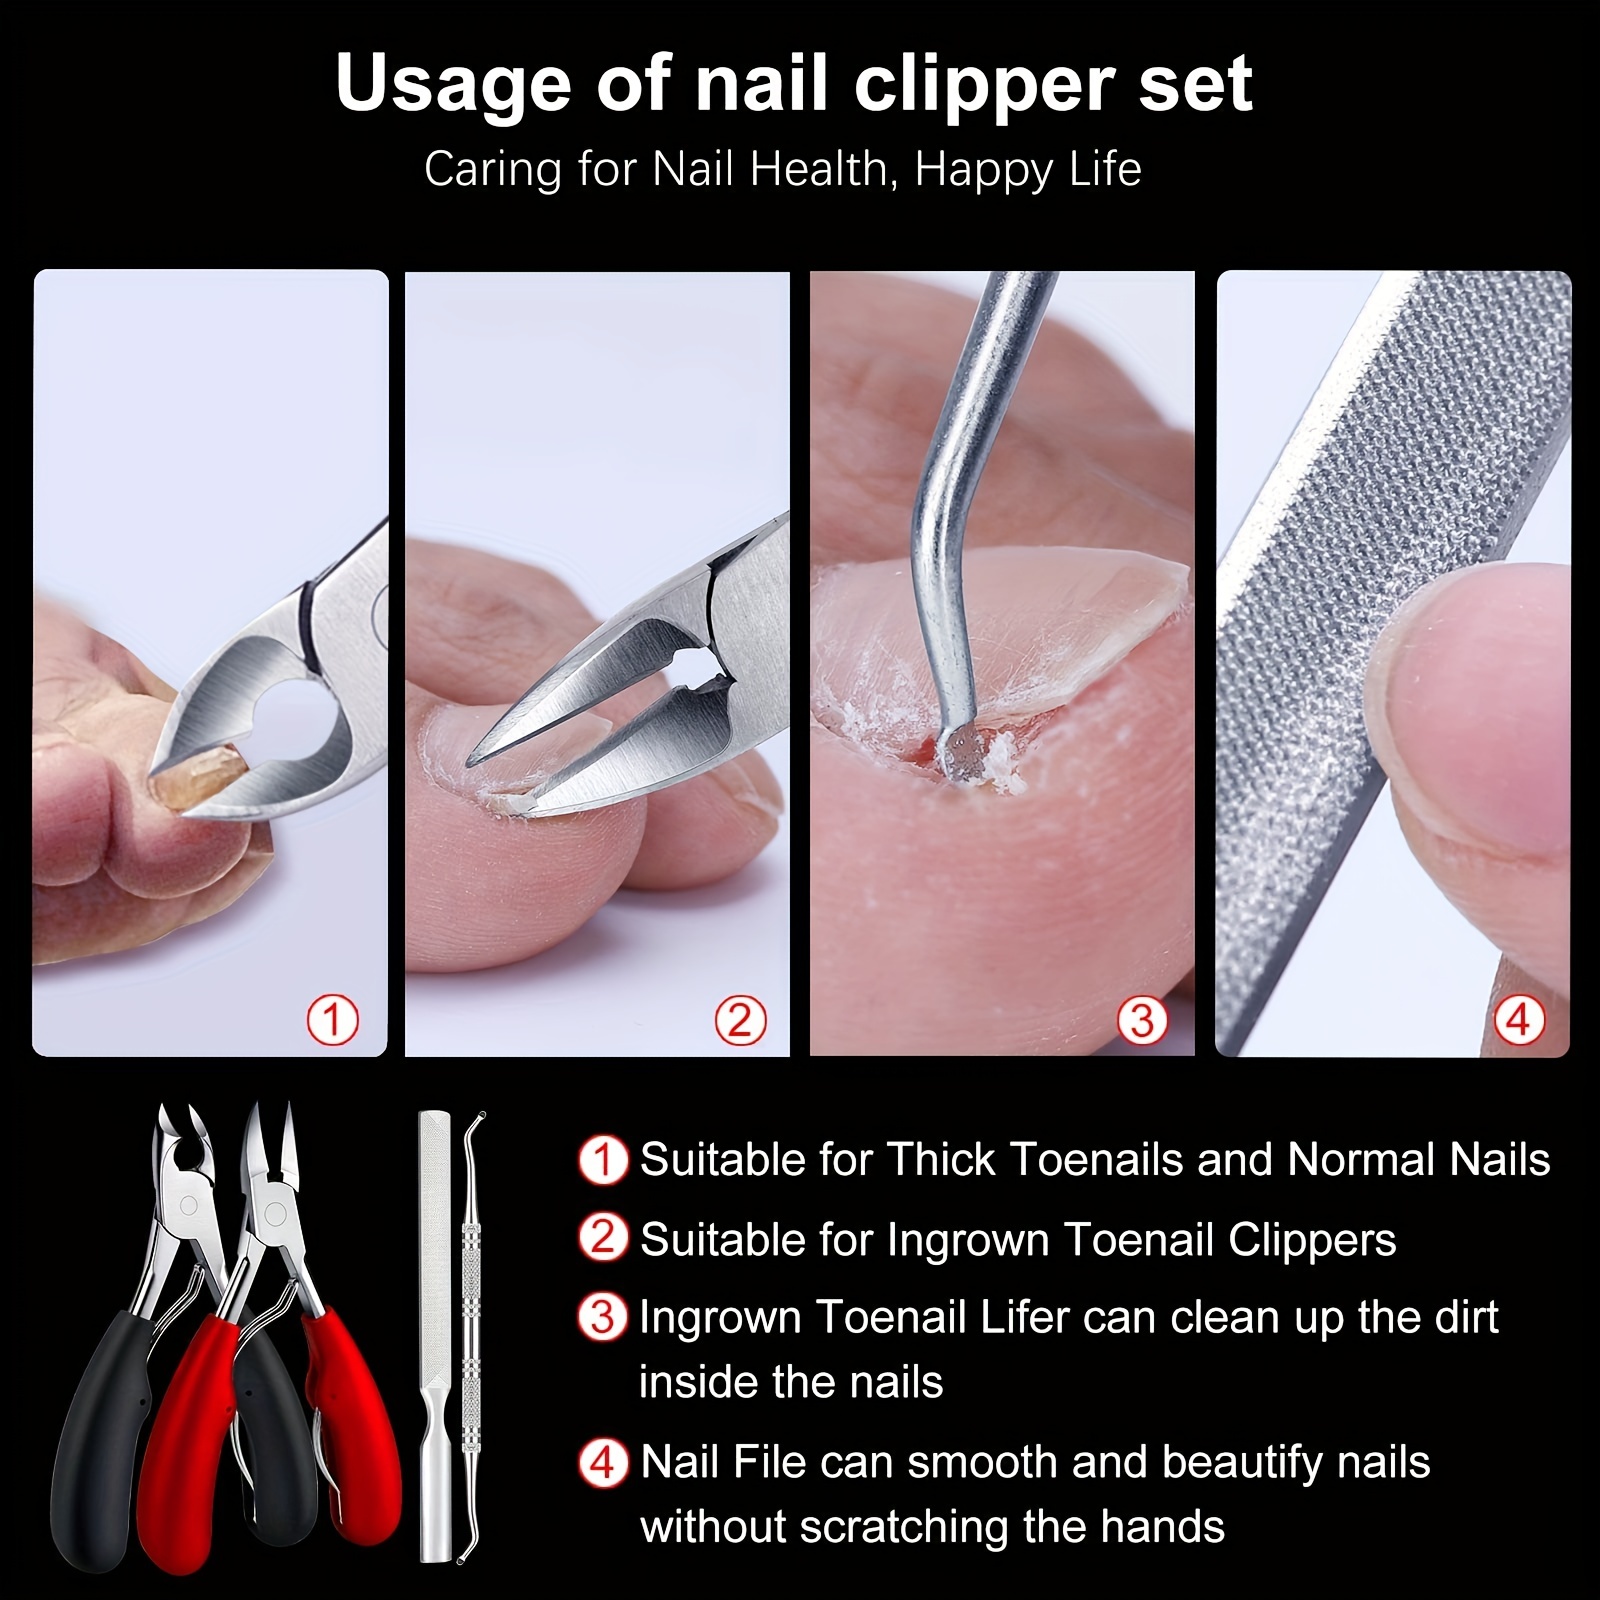 Toenail Clippers For Thick Nails Toenails For Men And Women